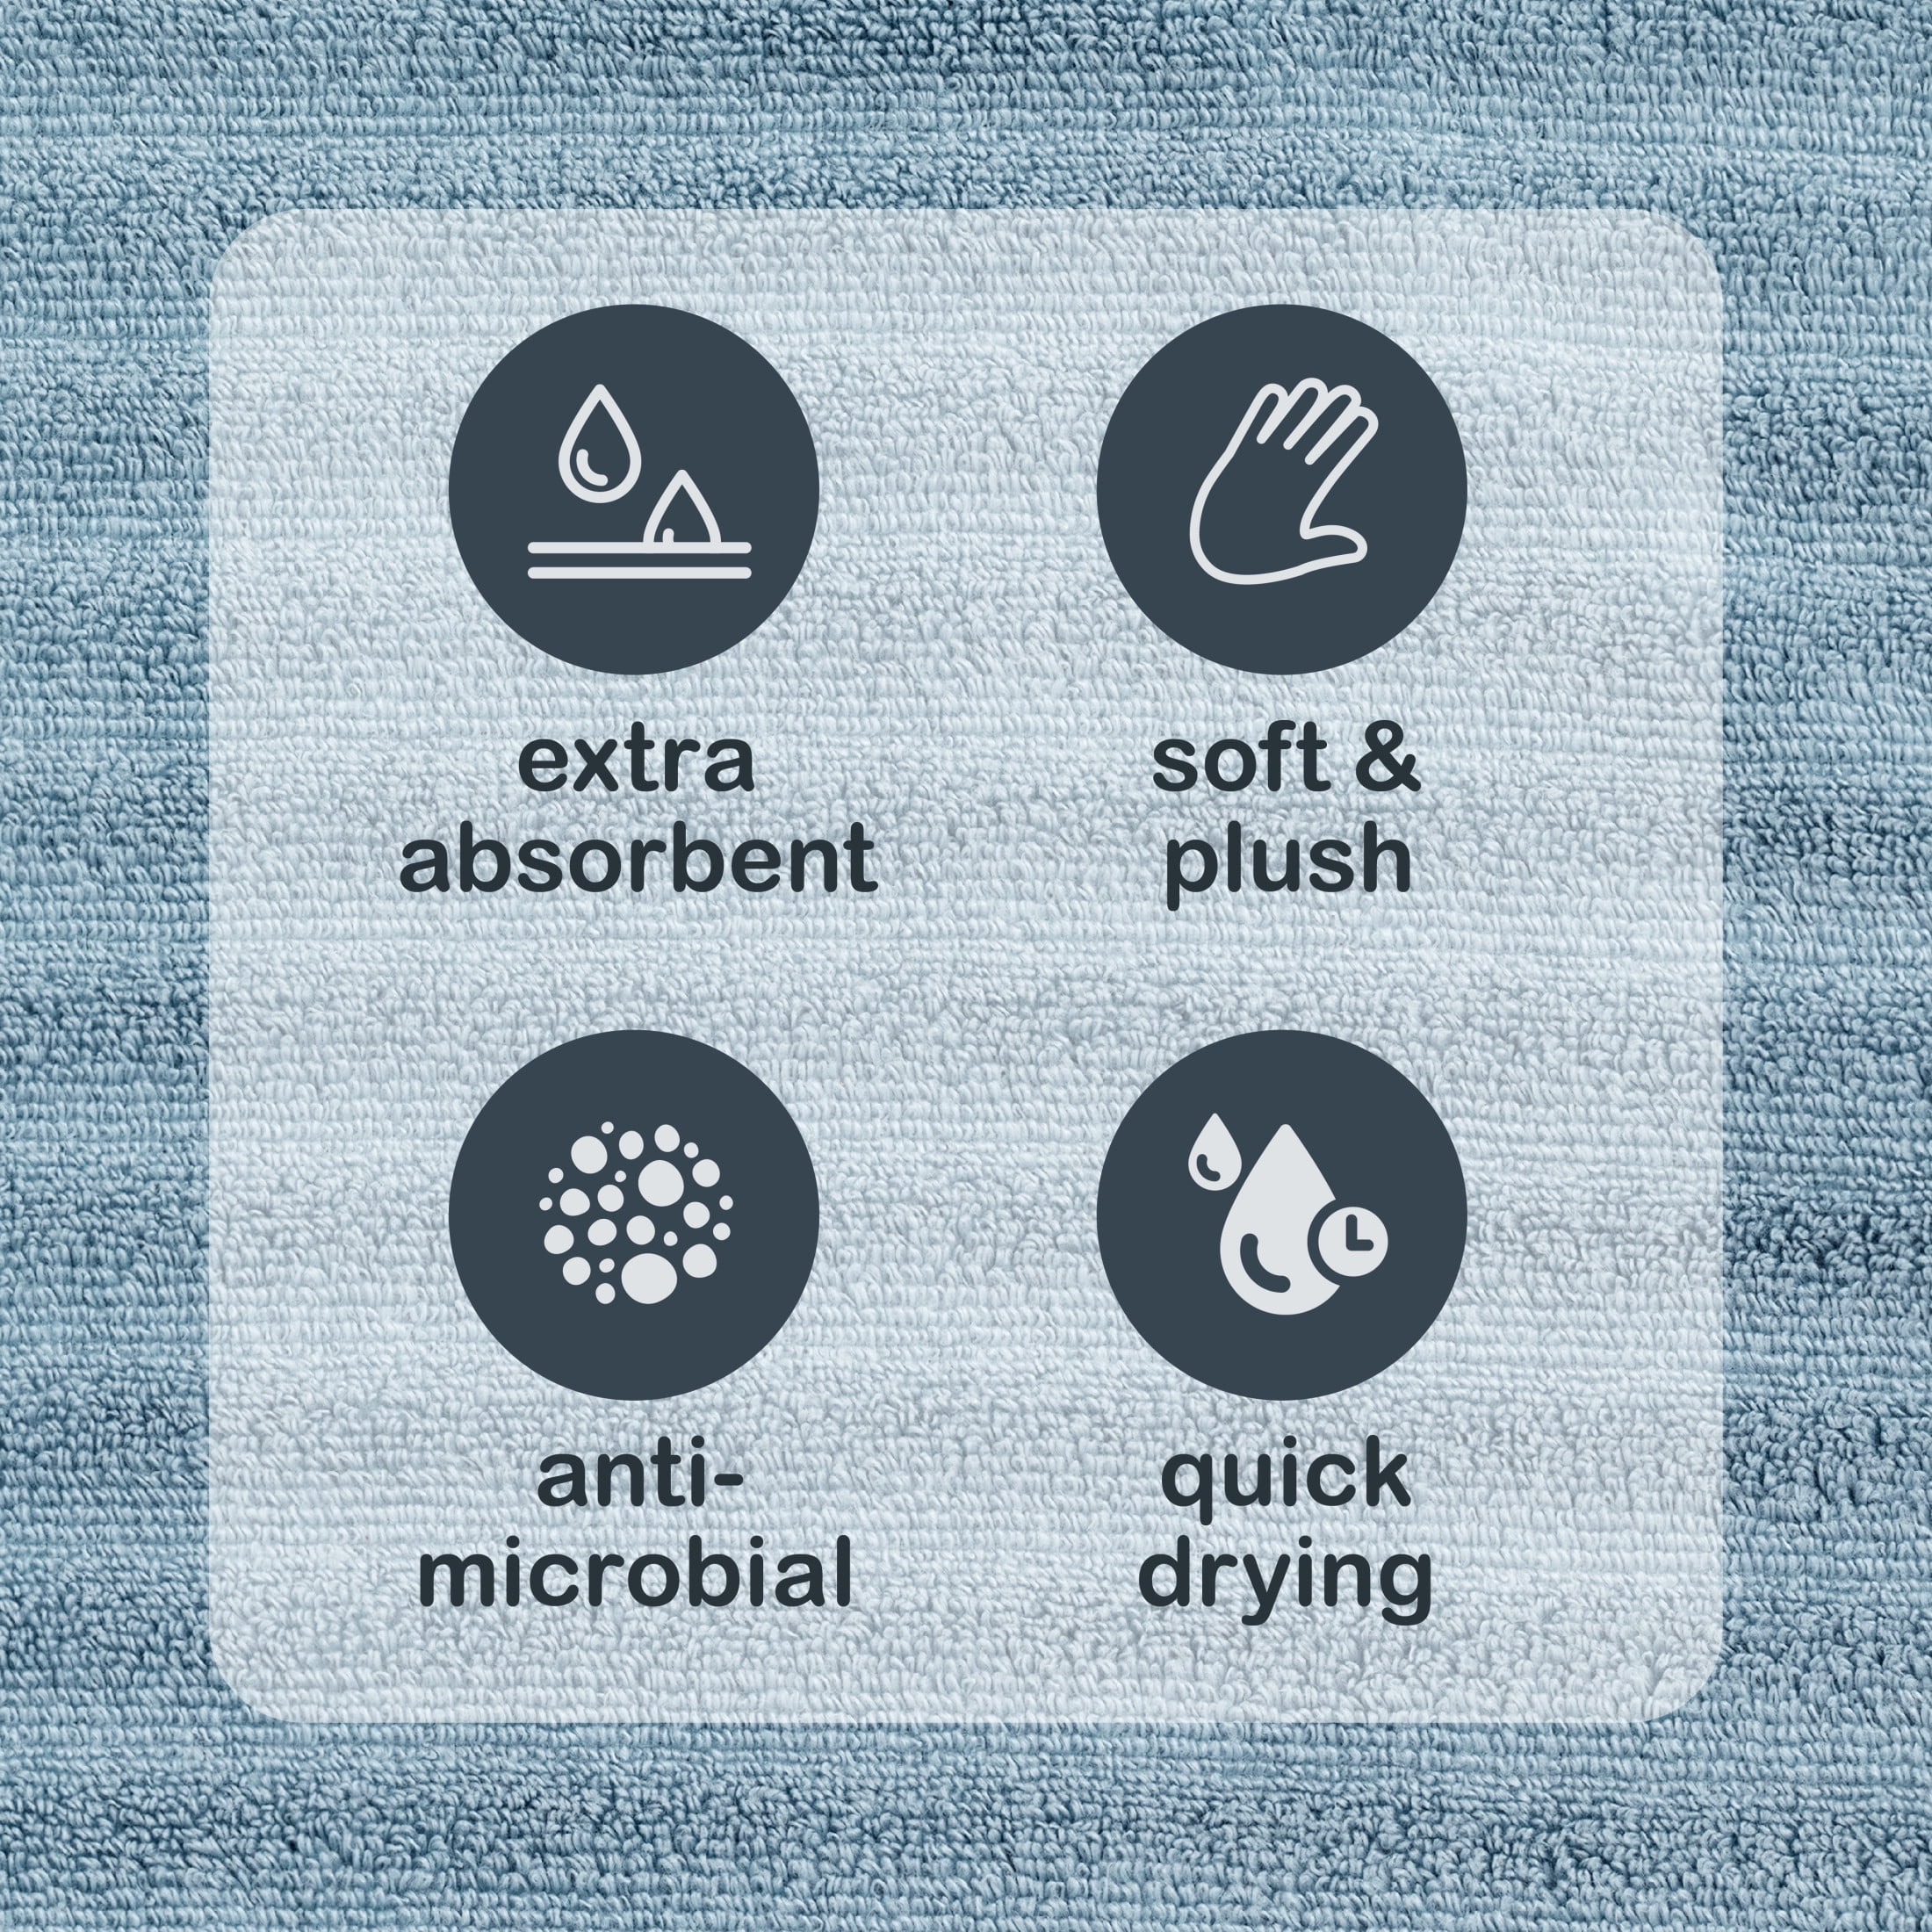 Mainstays Soft & Plush Touch 14 Piece Cotton-Recycled Polyester Bath Towel  Set, Blue 